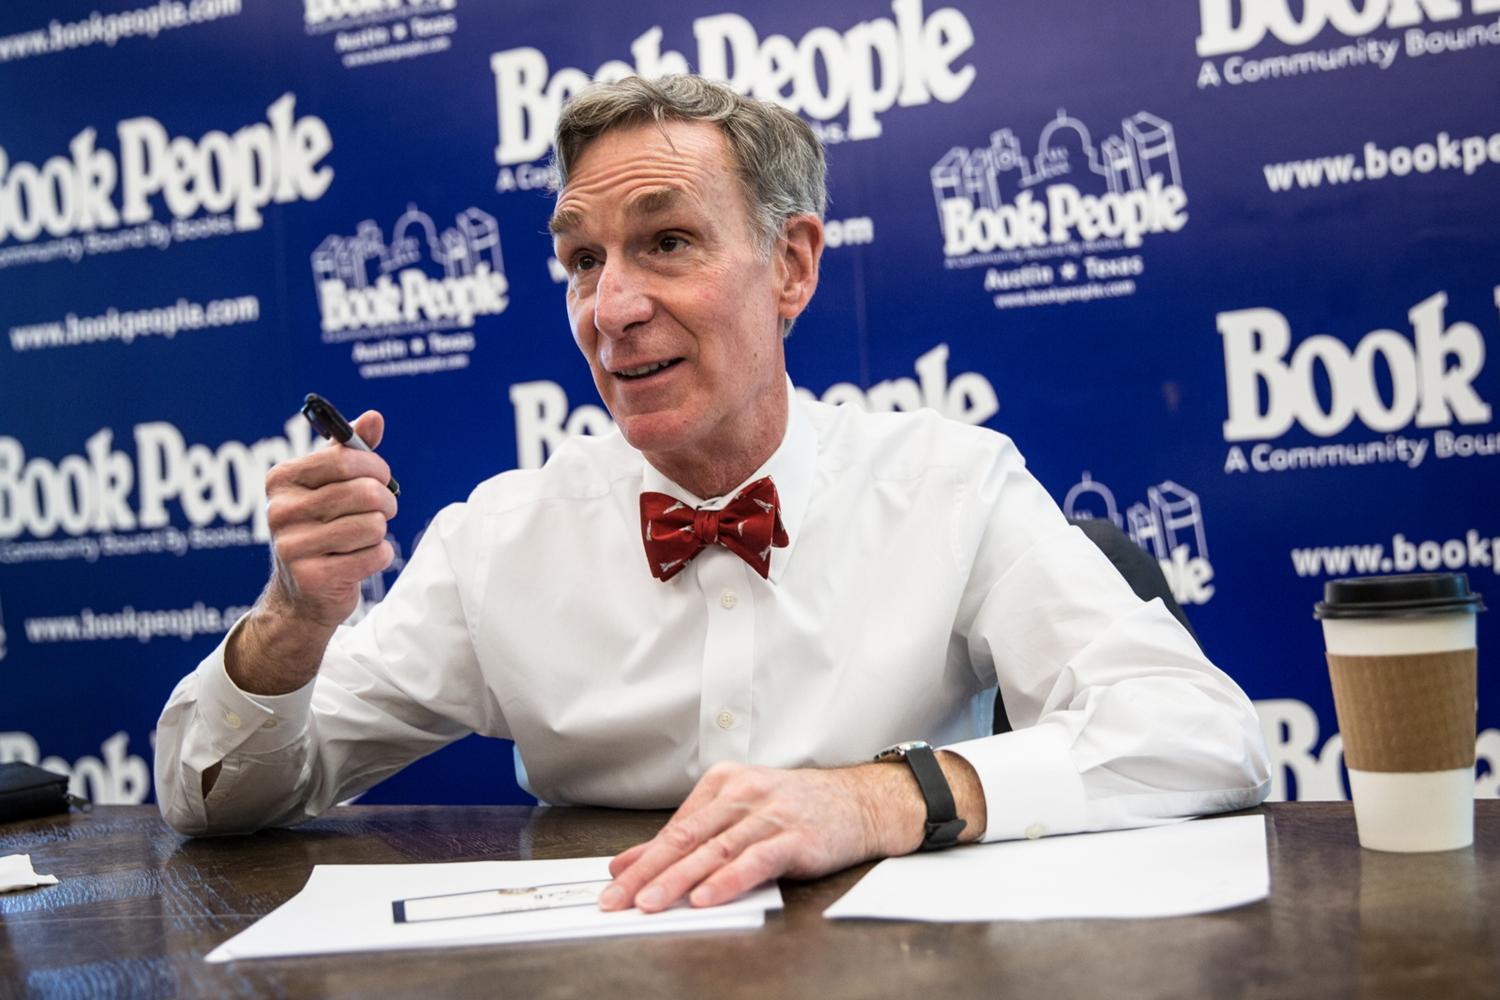 Bill Nye, science educator and TV personality, signs autographs at Book People on March 12, 2017. (Tamir Kalifa/Austin American-Statesman/TNS)